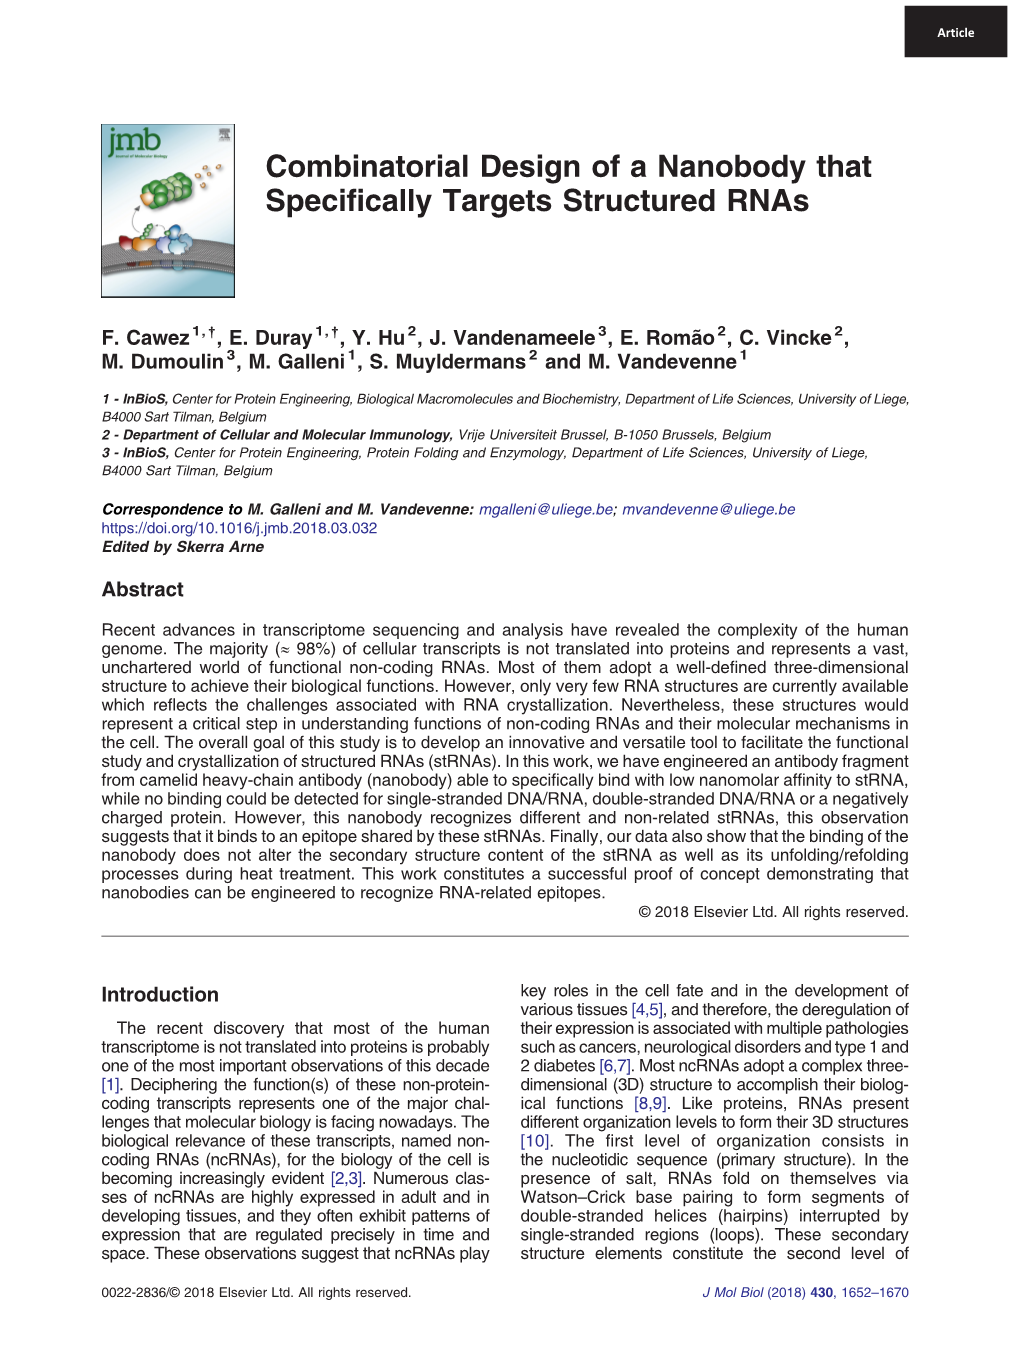 Combinatorial Design of a Nanobody That Specifically Targets Structured Rnas